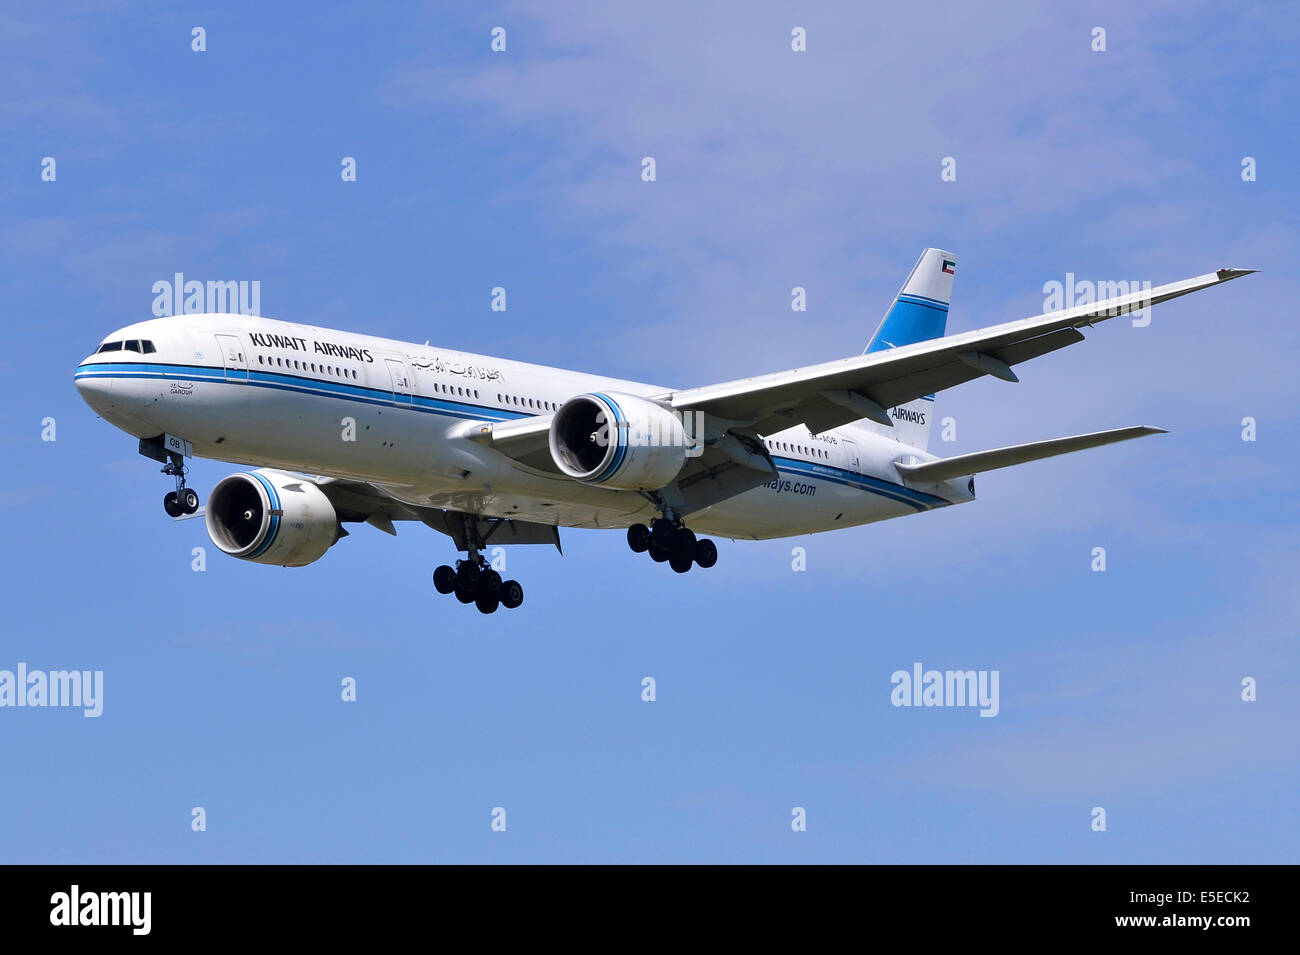 Boeing 777 operated by Kuwait Airways on approach for landing at London Heathrow Airport Stock Photo